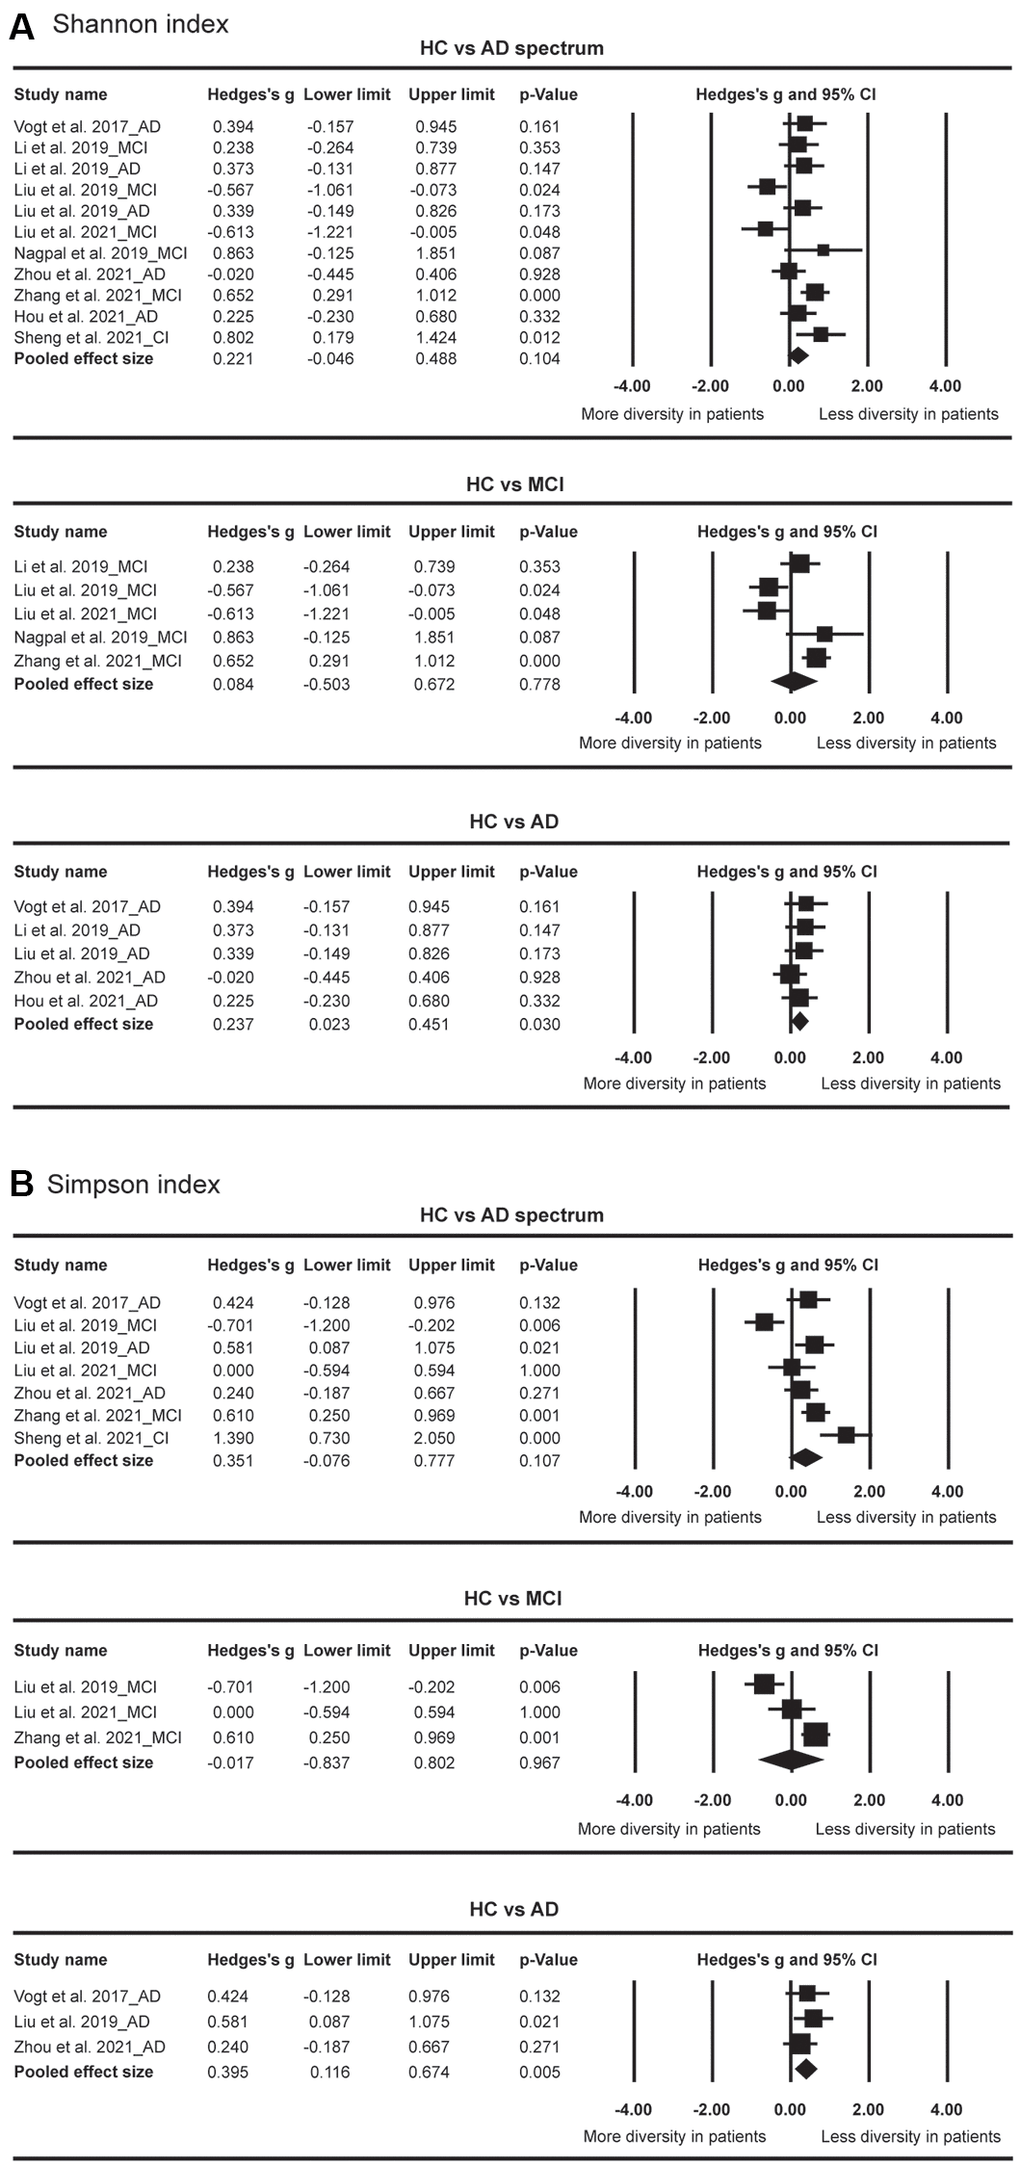 Forest plots of Shannon index (A) and Simpson index (B) in the comparisons between healthy controls (HC) and Alzheimer’s disease (AD) spectrum. Patients with AD spectrum consisted of mild cognitive impairments (MCI) and AD.